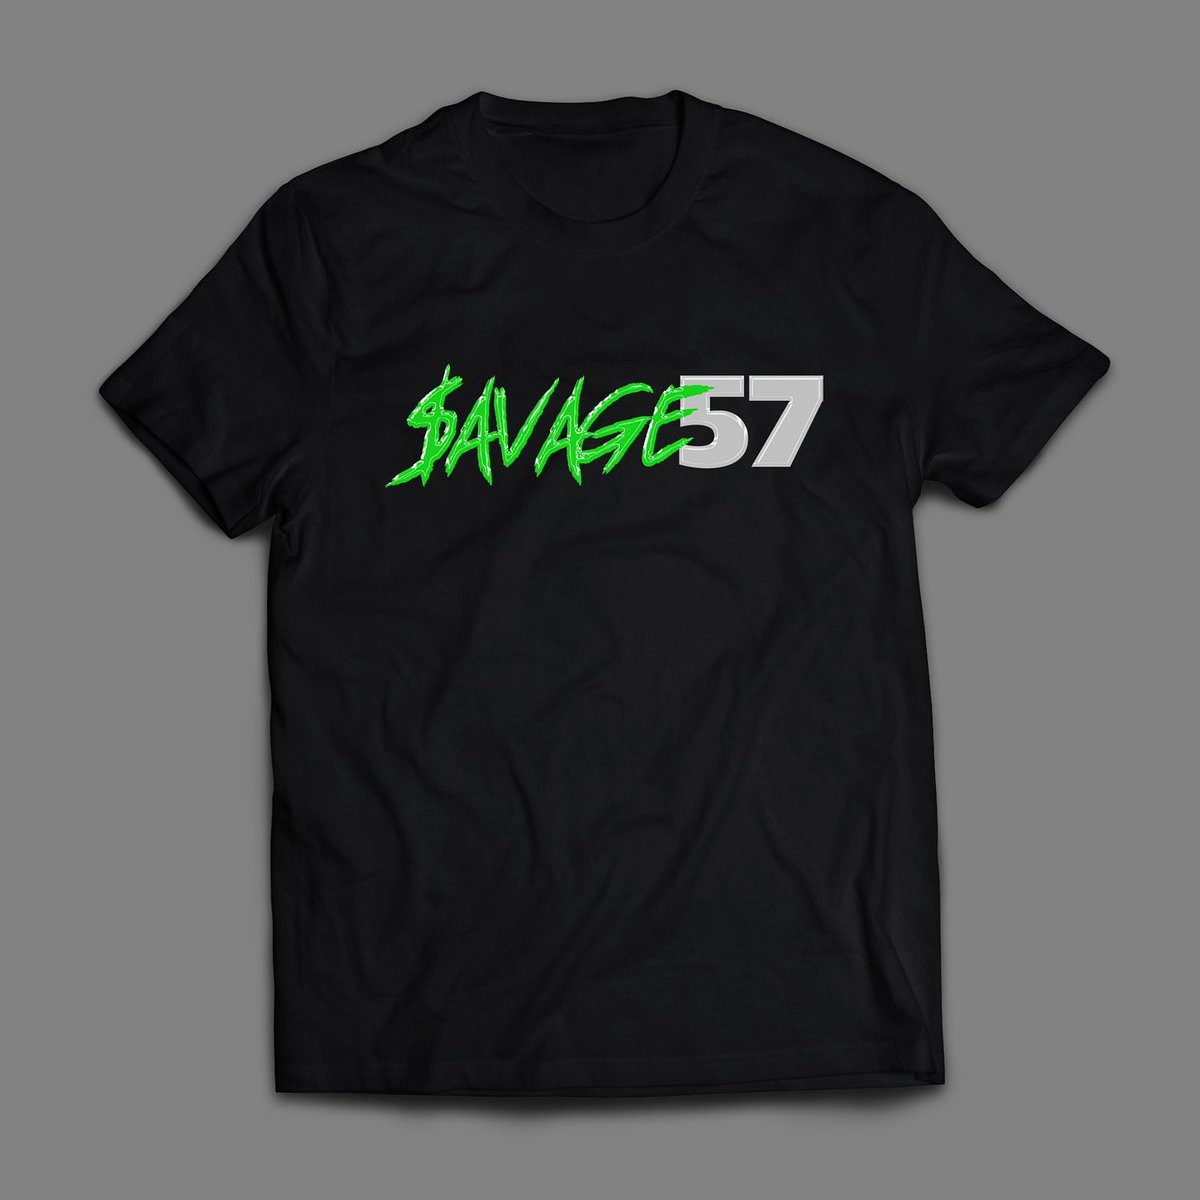 $avage57 short sleeve t-shirts will be available soon. Go to website in bio and subscribe to our email list for dates on store opening and other upcoming gear. #clothingline #brand #newapparel #tshirts #printcompany #support #757 #virginia #Savage #Business #BlackBusiness #gear